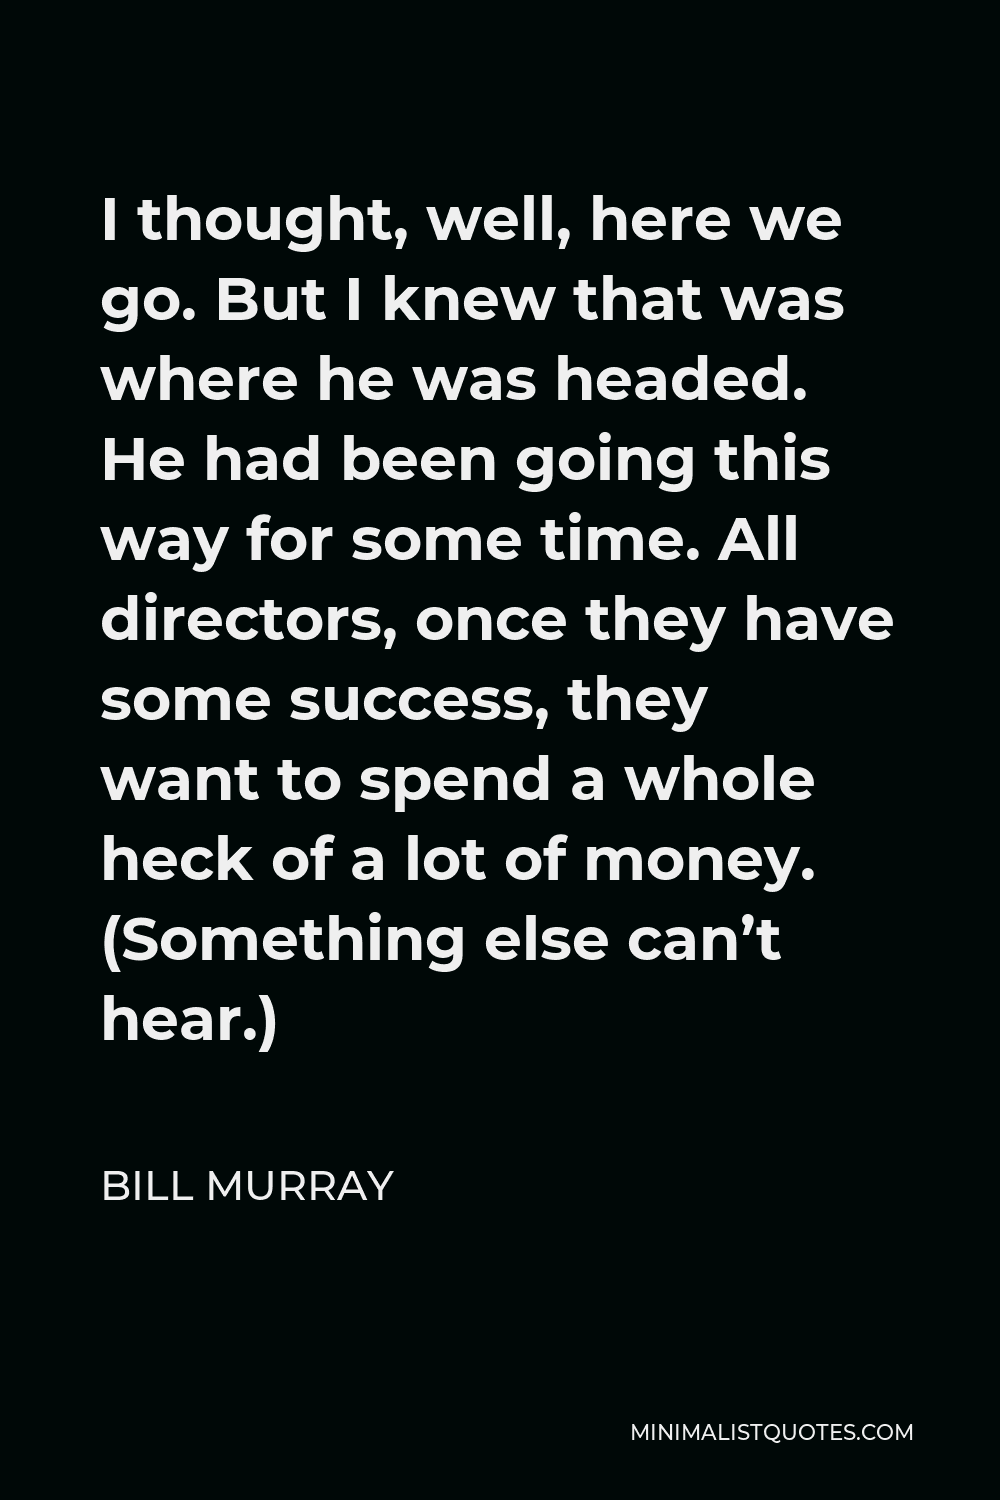 Bill Murray Quote - I thought, well, here we go. But I knew that was where he was headed. He had been going this way for some time. All directors, once they have some success, they want to spend a whole heck of a lot of money. (Something else can’t hear.)